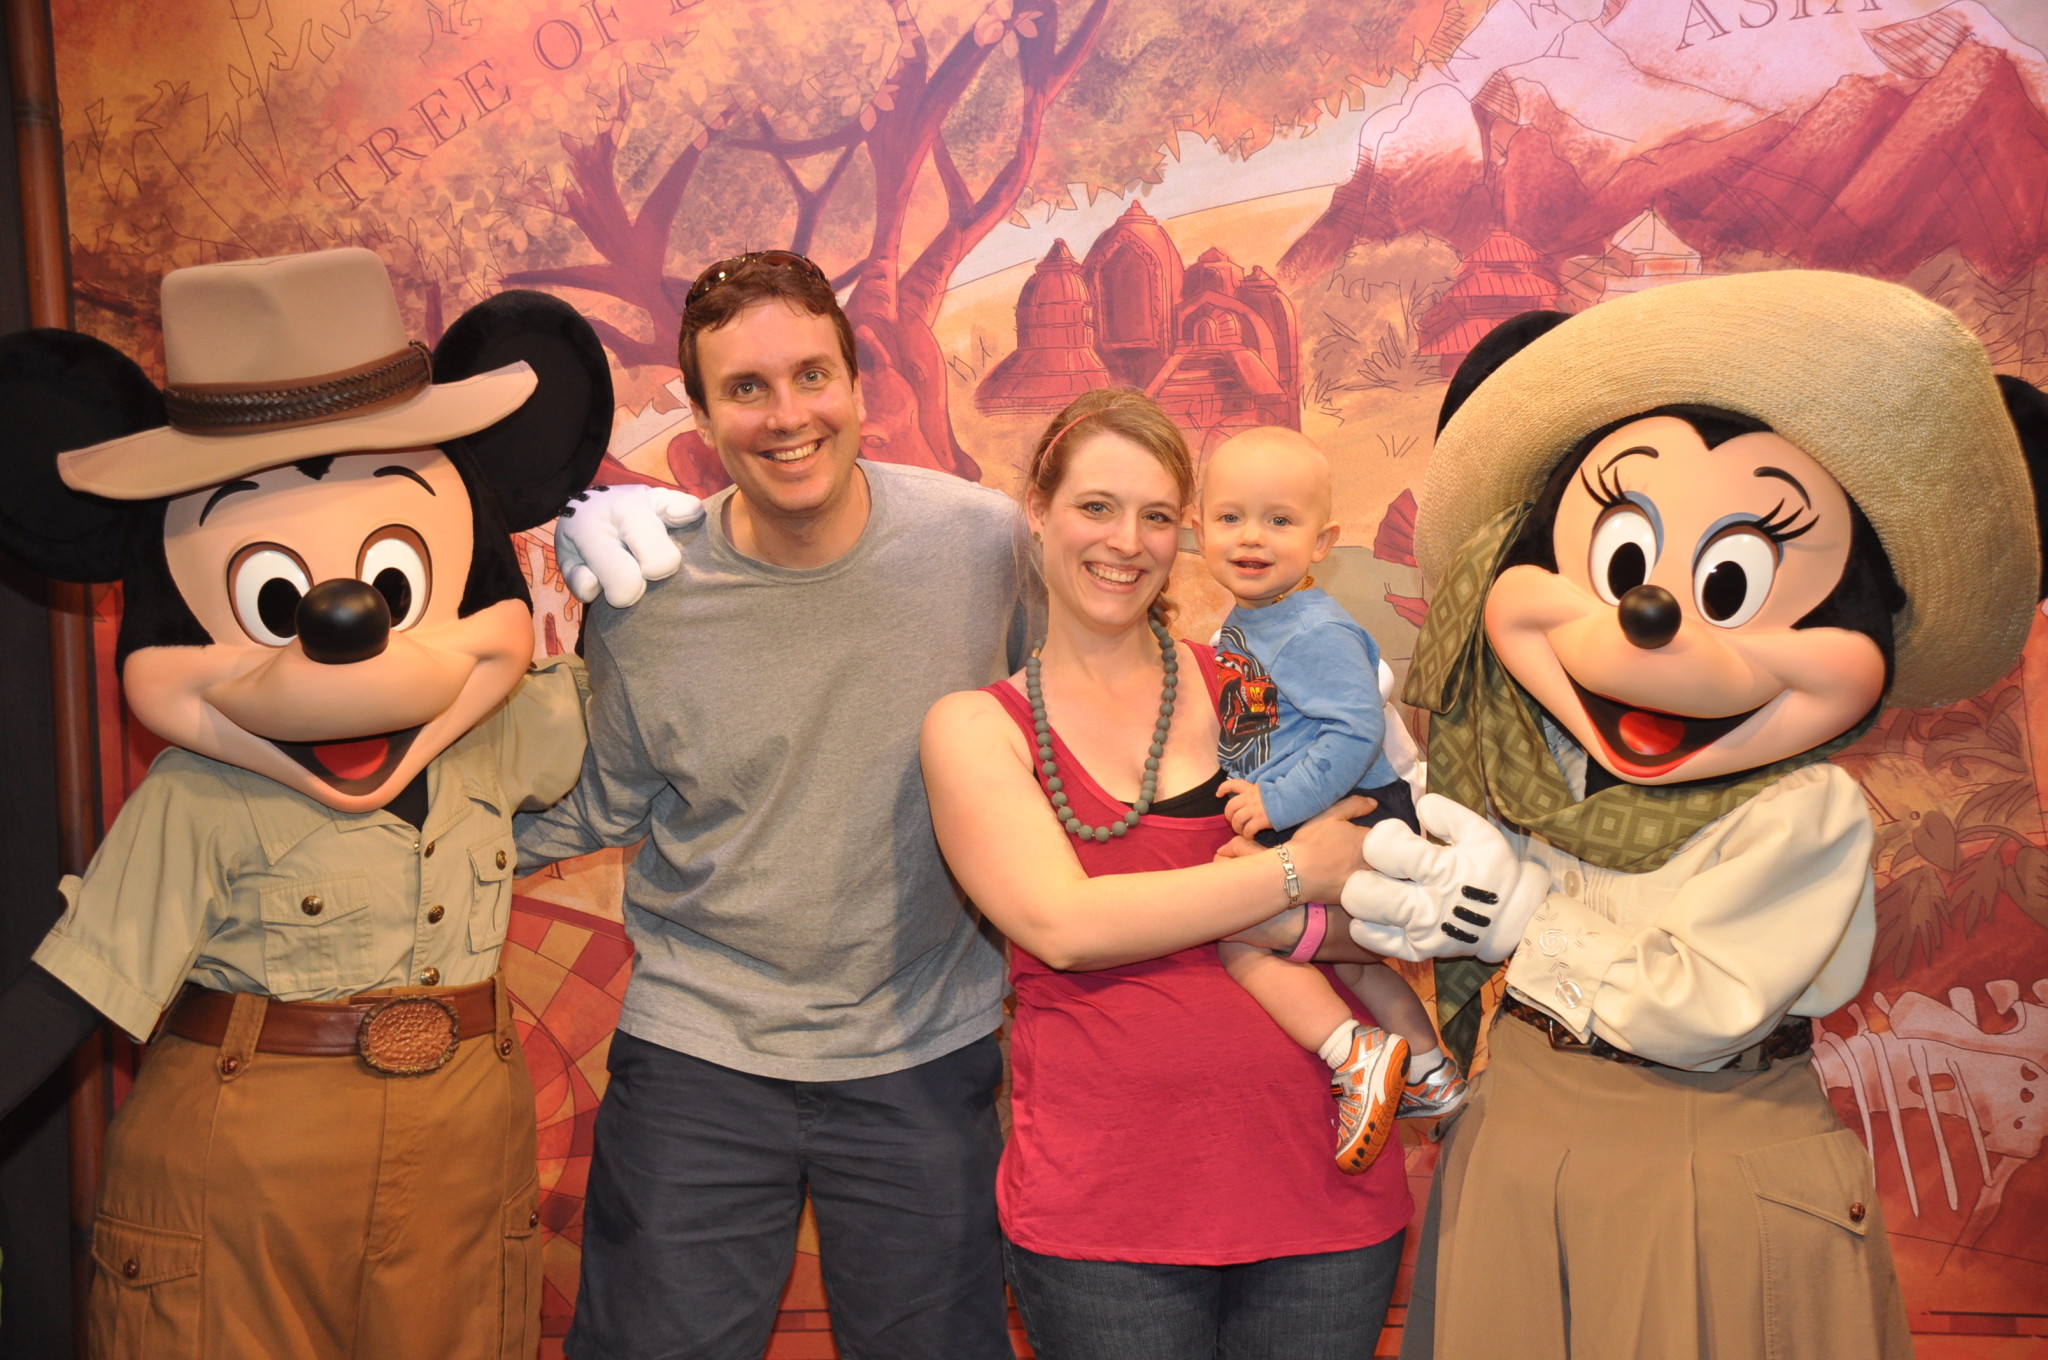 7 Tips to Make the Most of Disney Character Meet and Greets